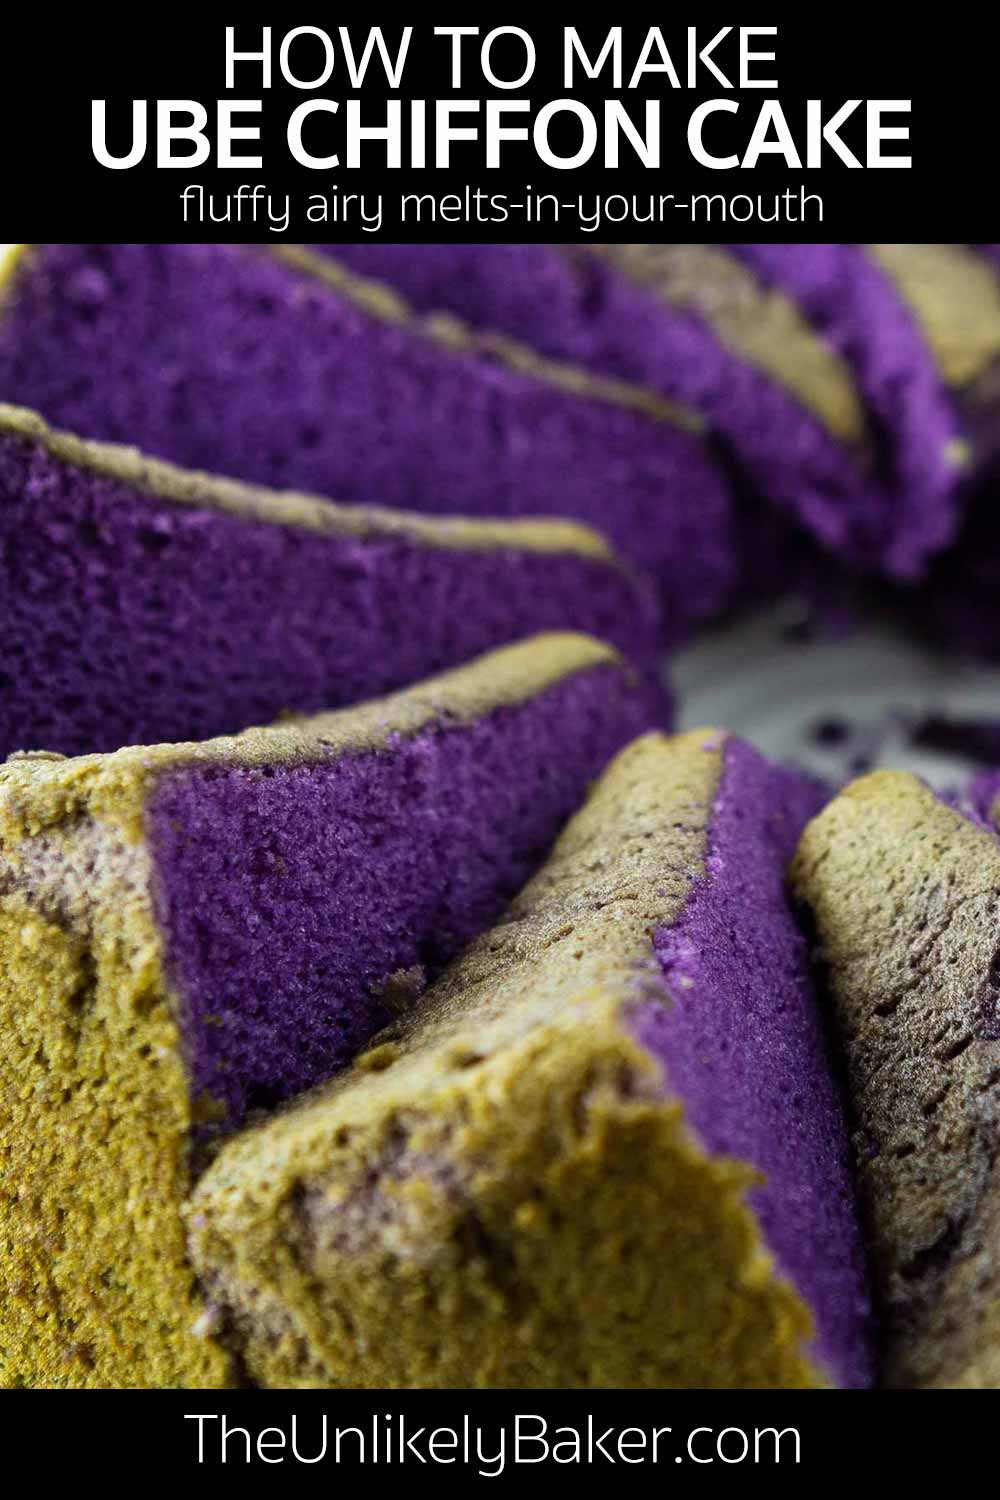 Ube Chiffon Cake Recipe (with Video Instructions) - The Unlikely Baker